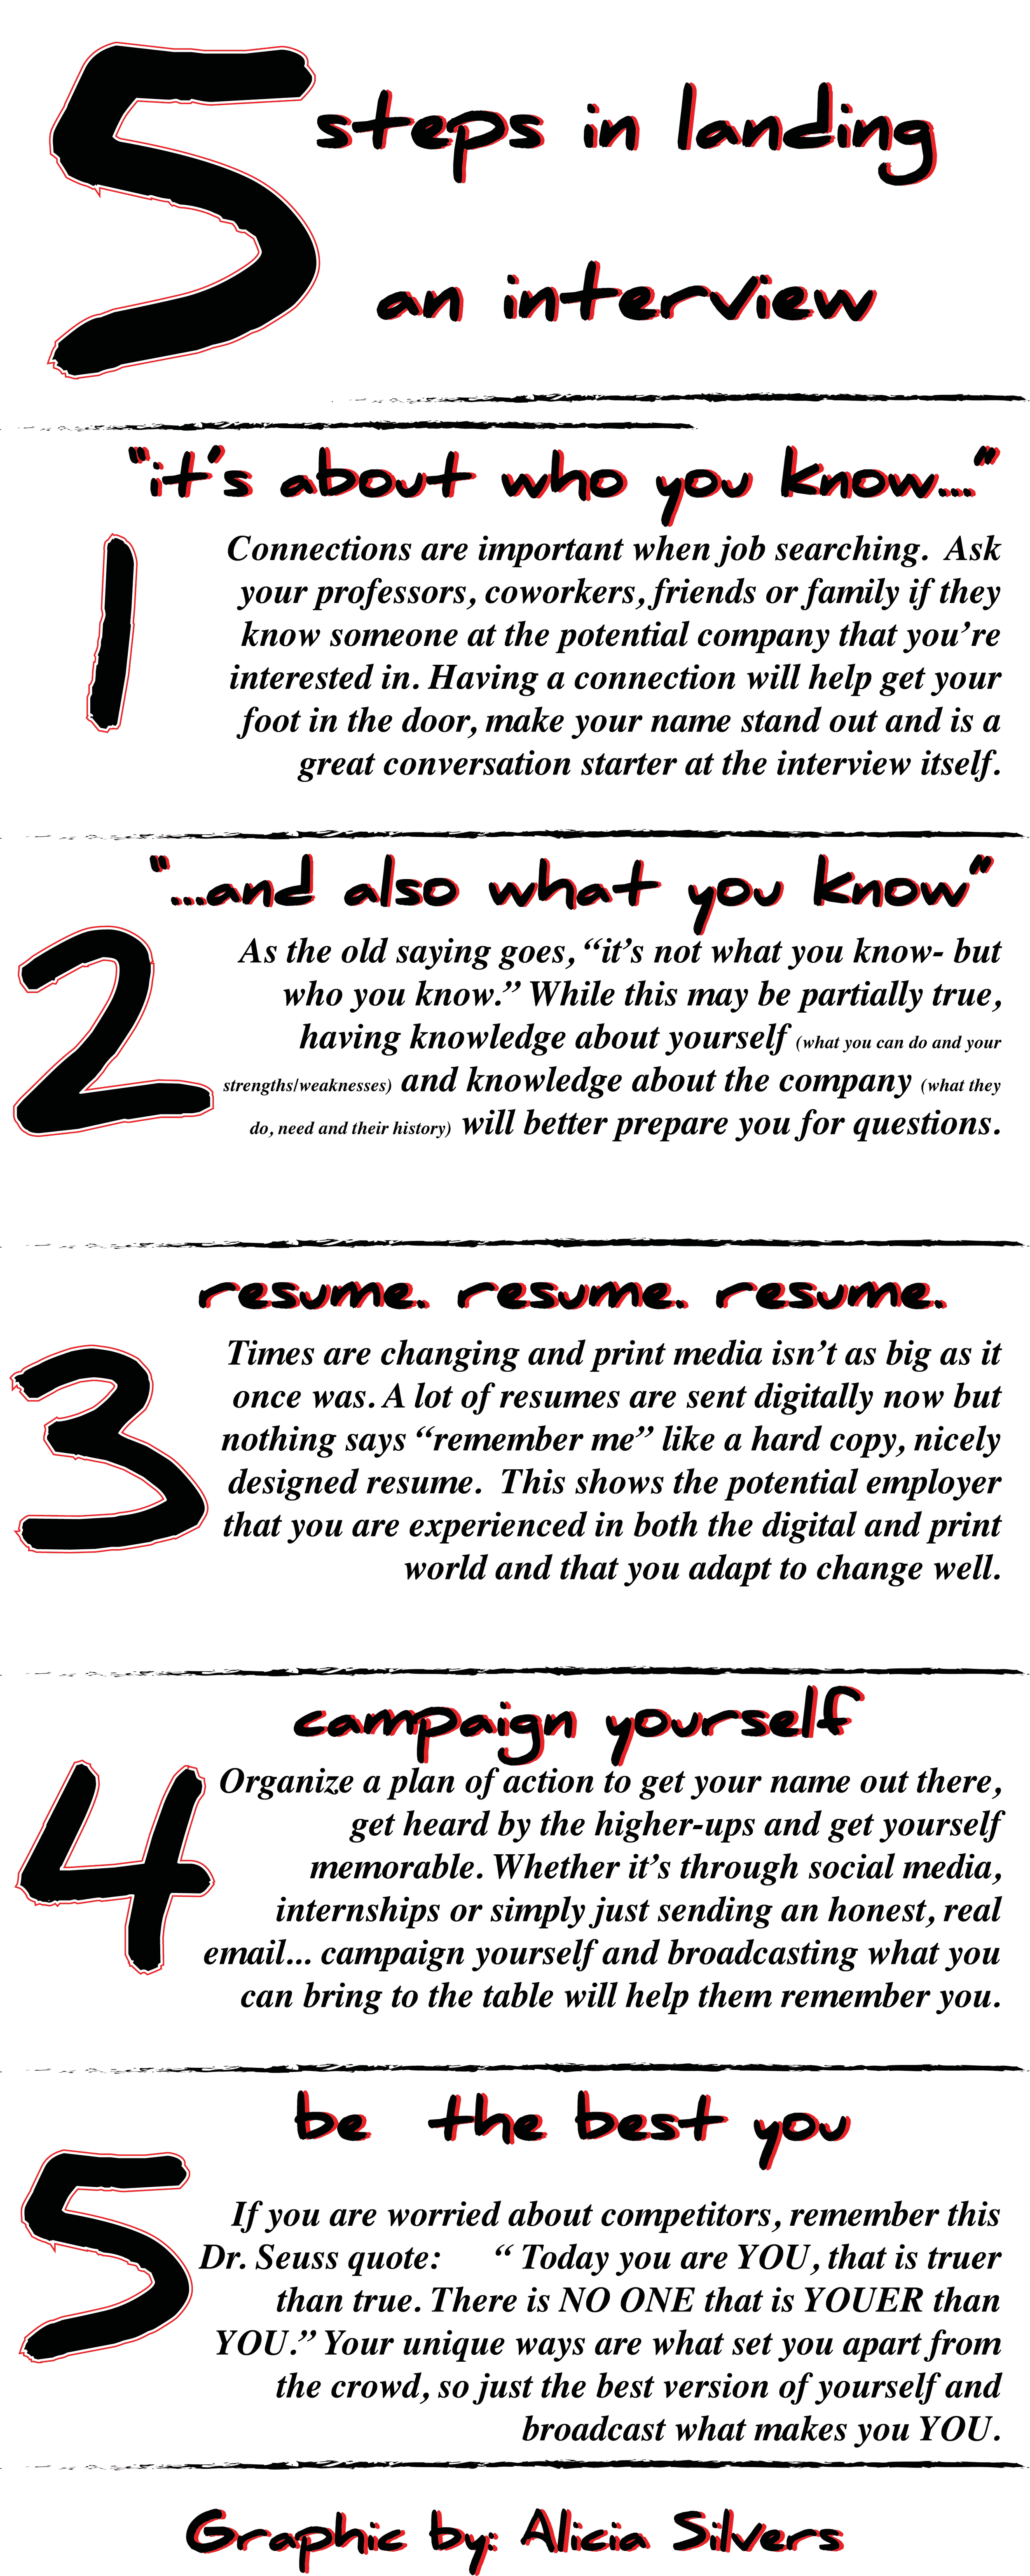 5 steps-02-02.png